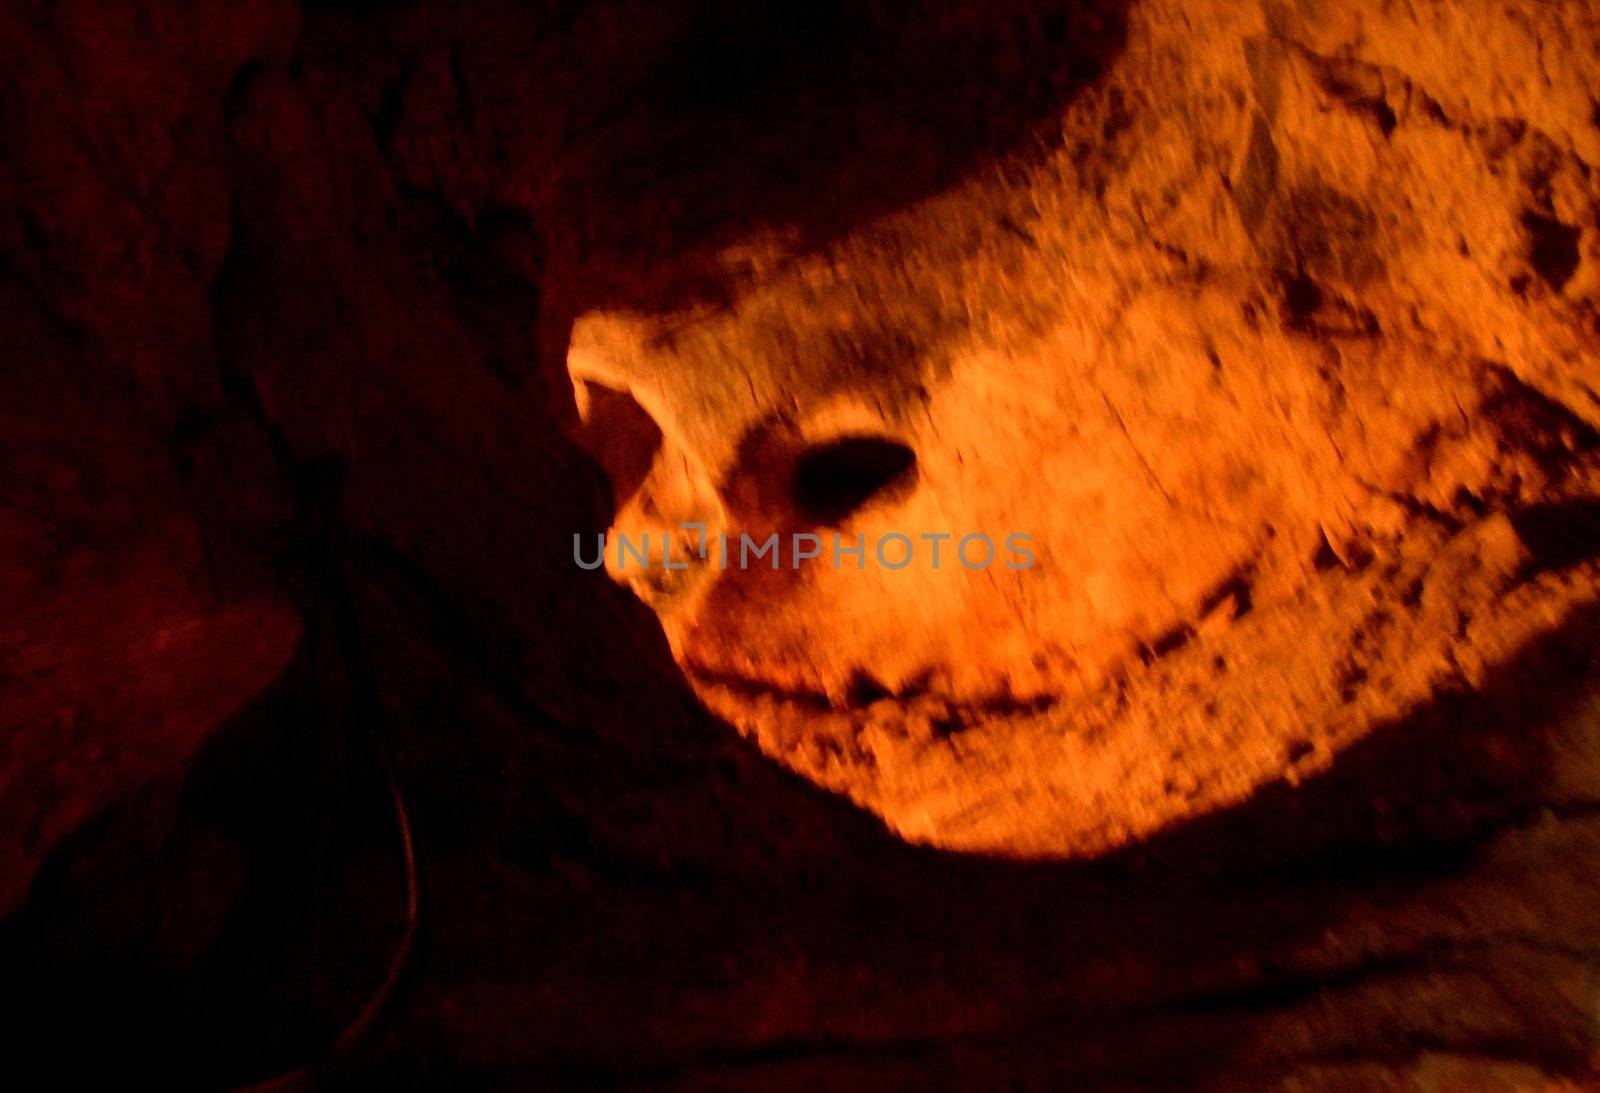 The shadows on the rock in the cave shows some scary picture … It’s just our imagination’s trick